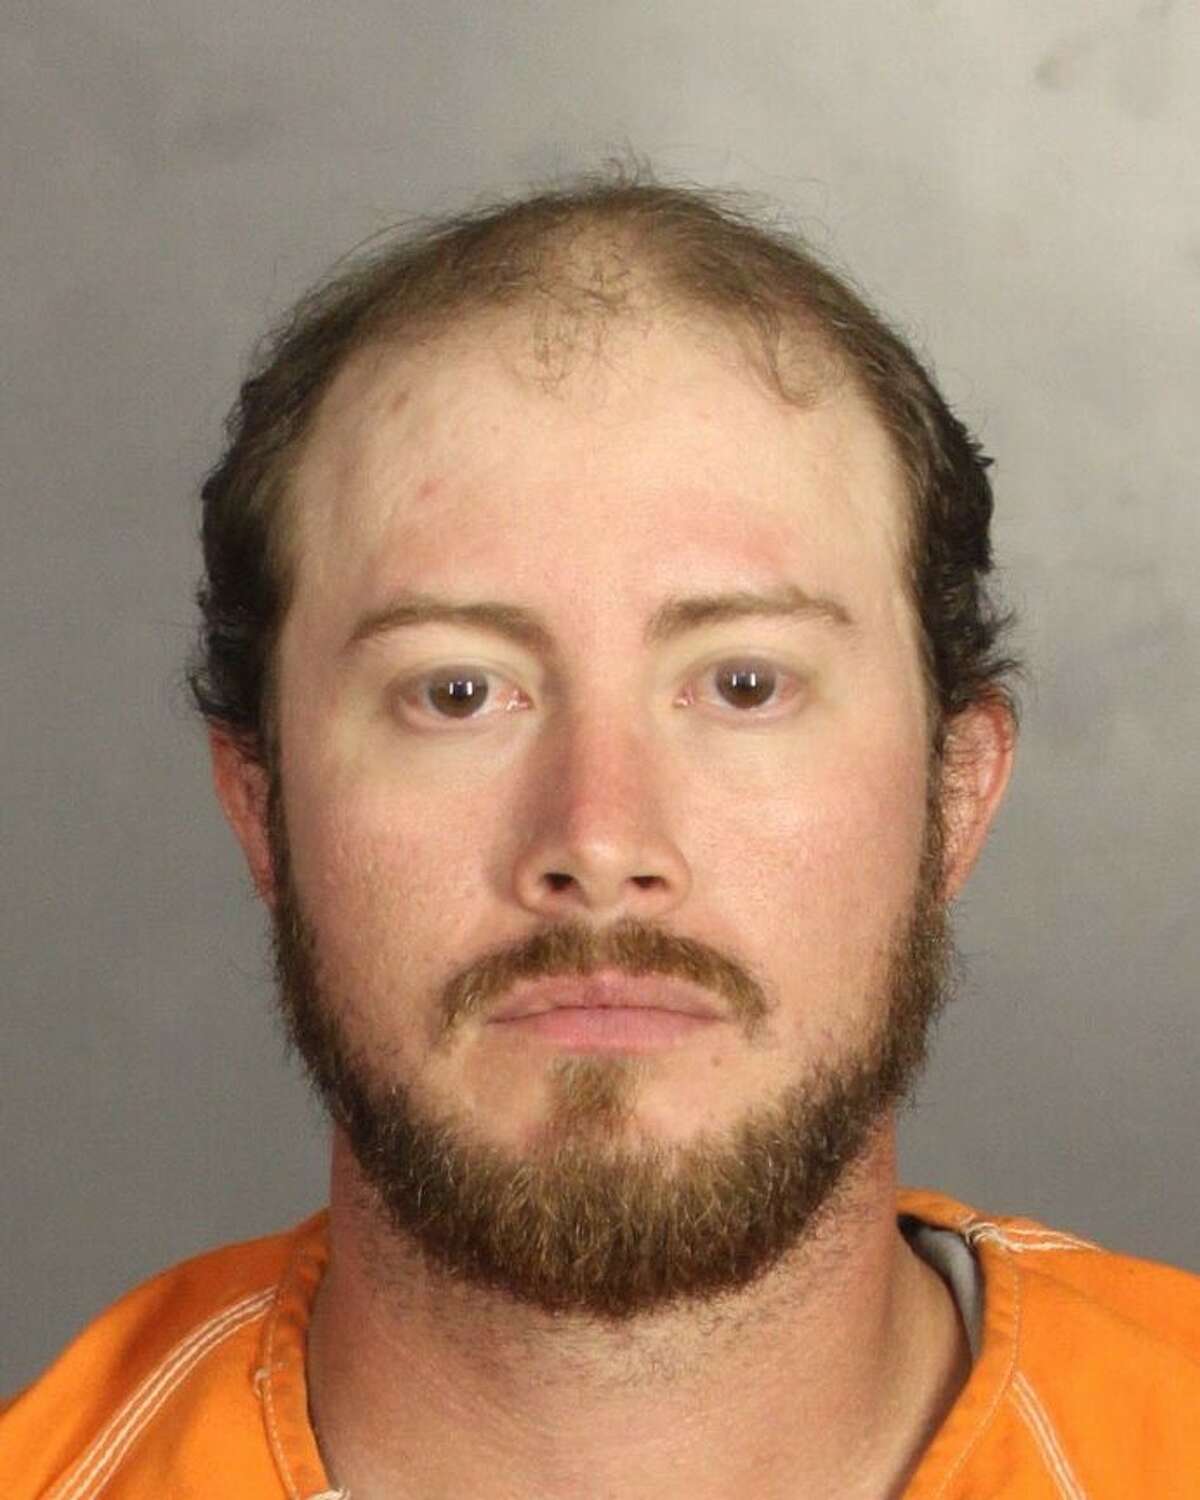 Jacob Reese, 29, was booked and charged with engaging in organized criminal activity in connection to a shooting involving motorcycle gangs at a Twin Peaks restaurant in Waco at around noon on May 17, 2015. The shooting left nine dead and 18 injured.